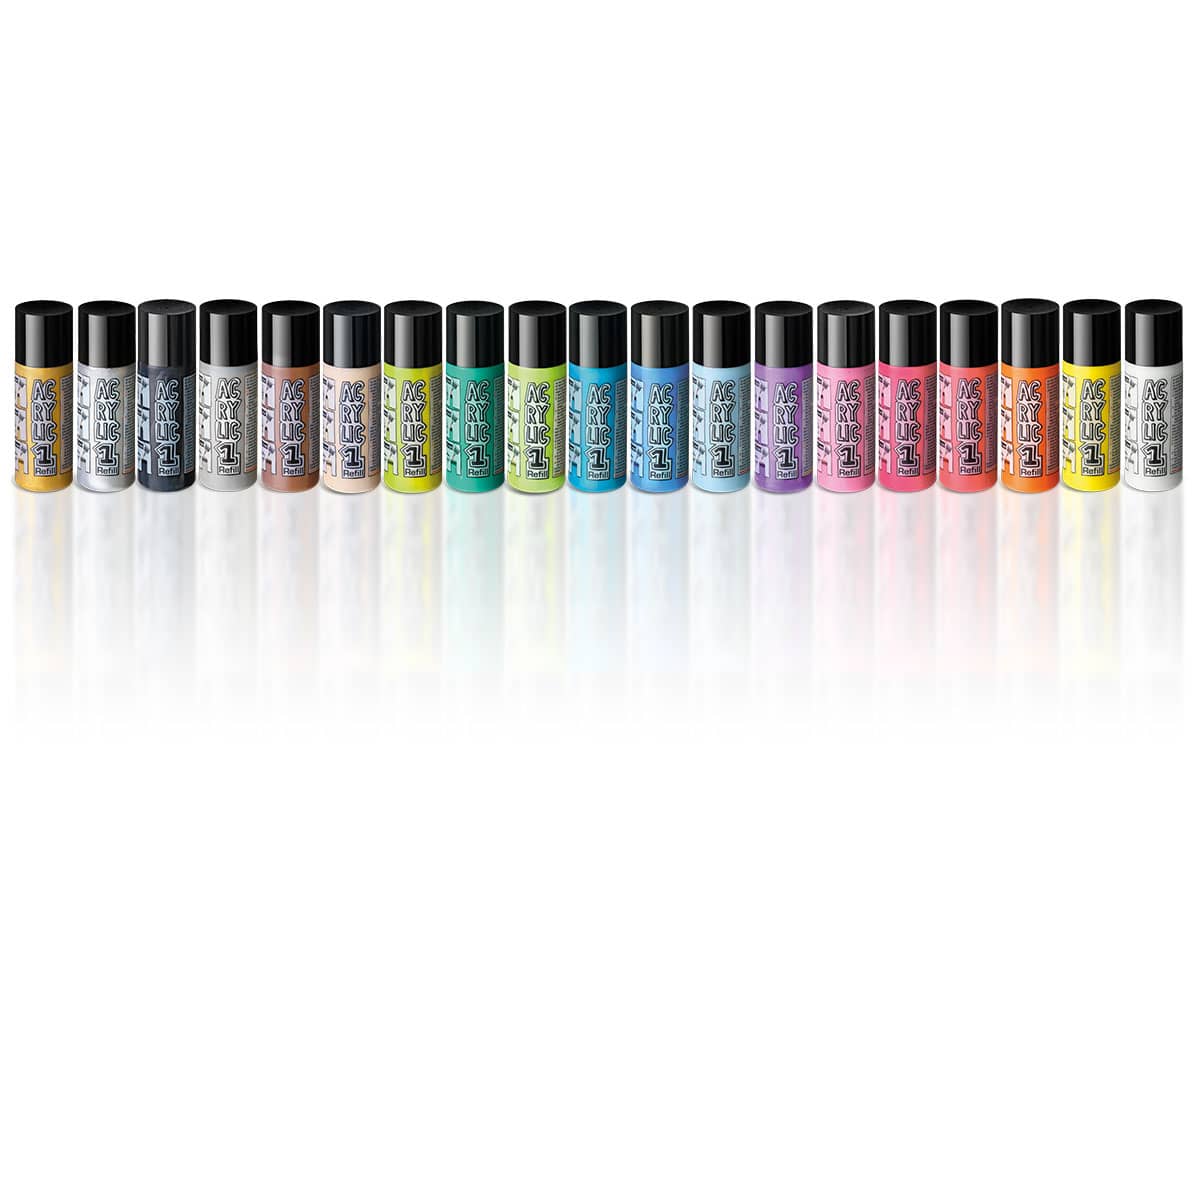 AcrylicOne Refill, 19 color set